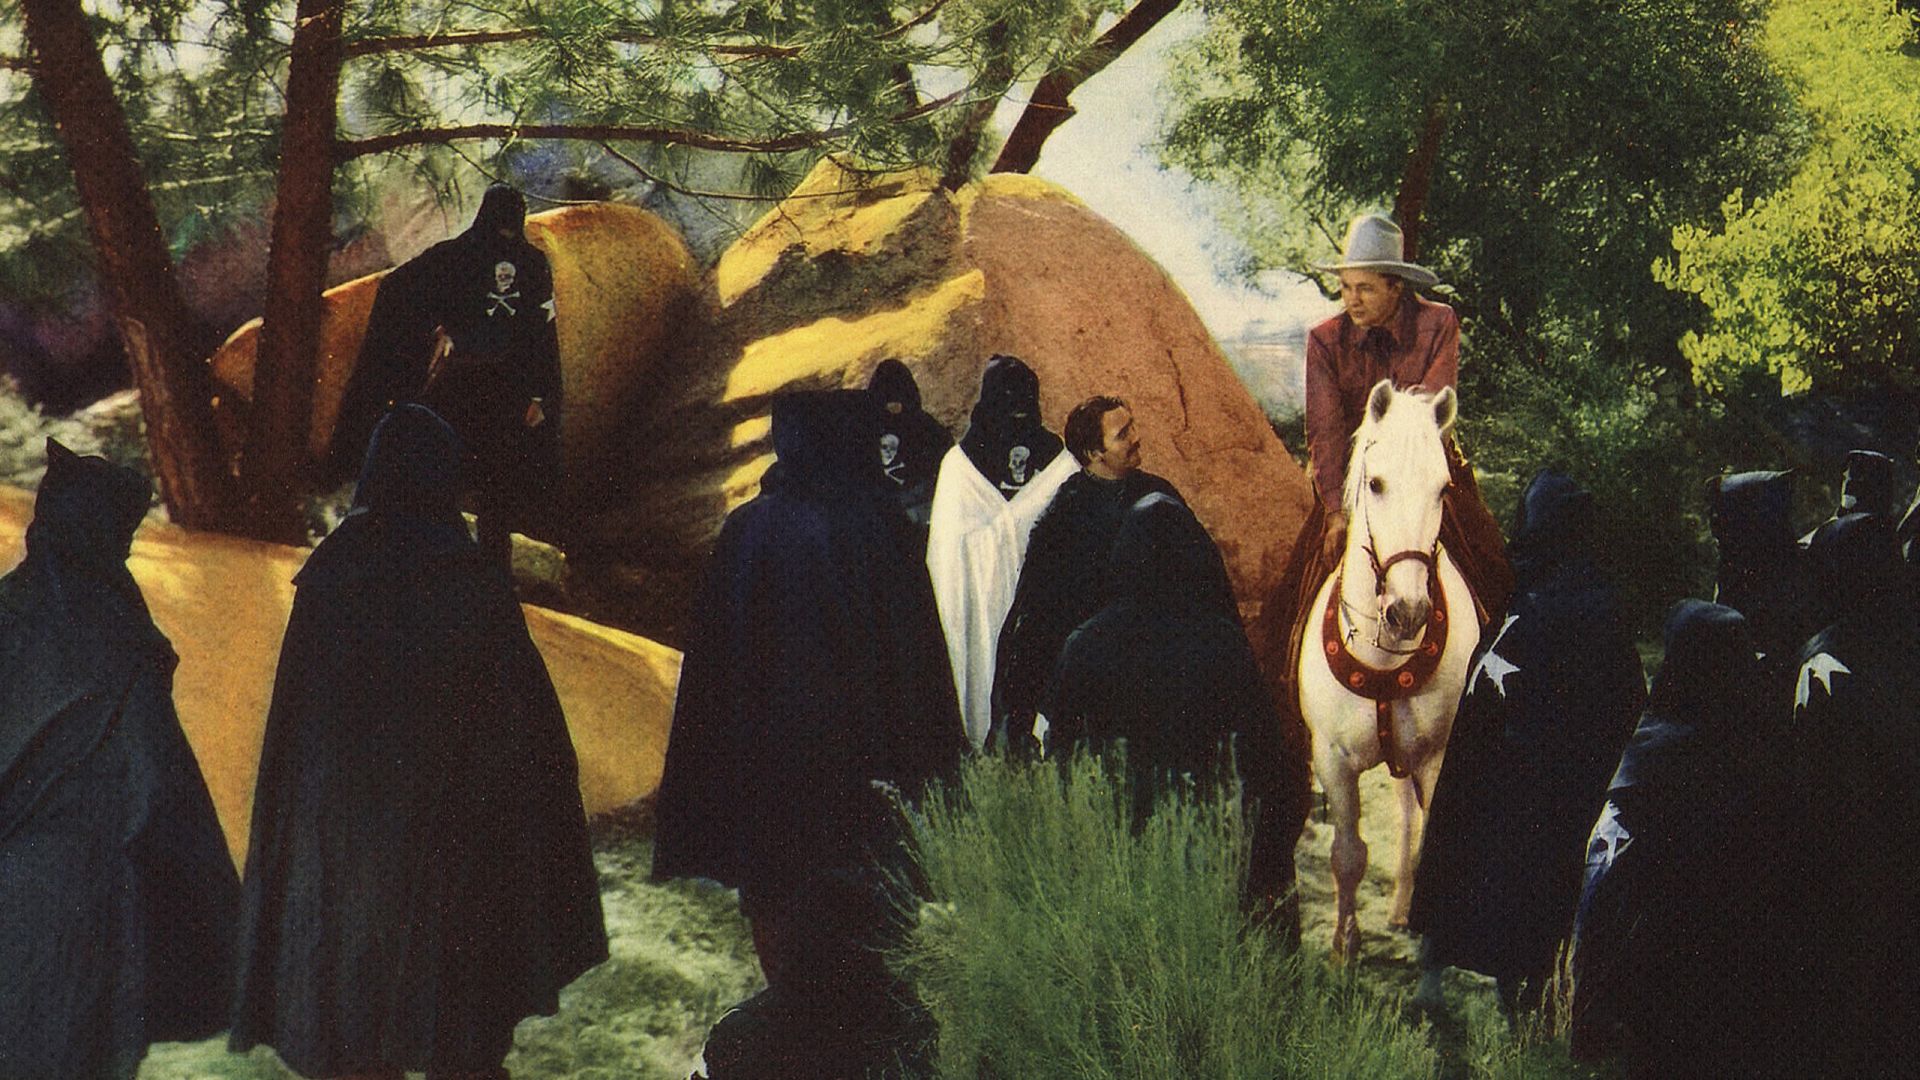 The Mystery of the Hooded Horsemen Backdrop